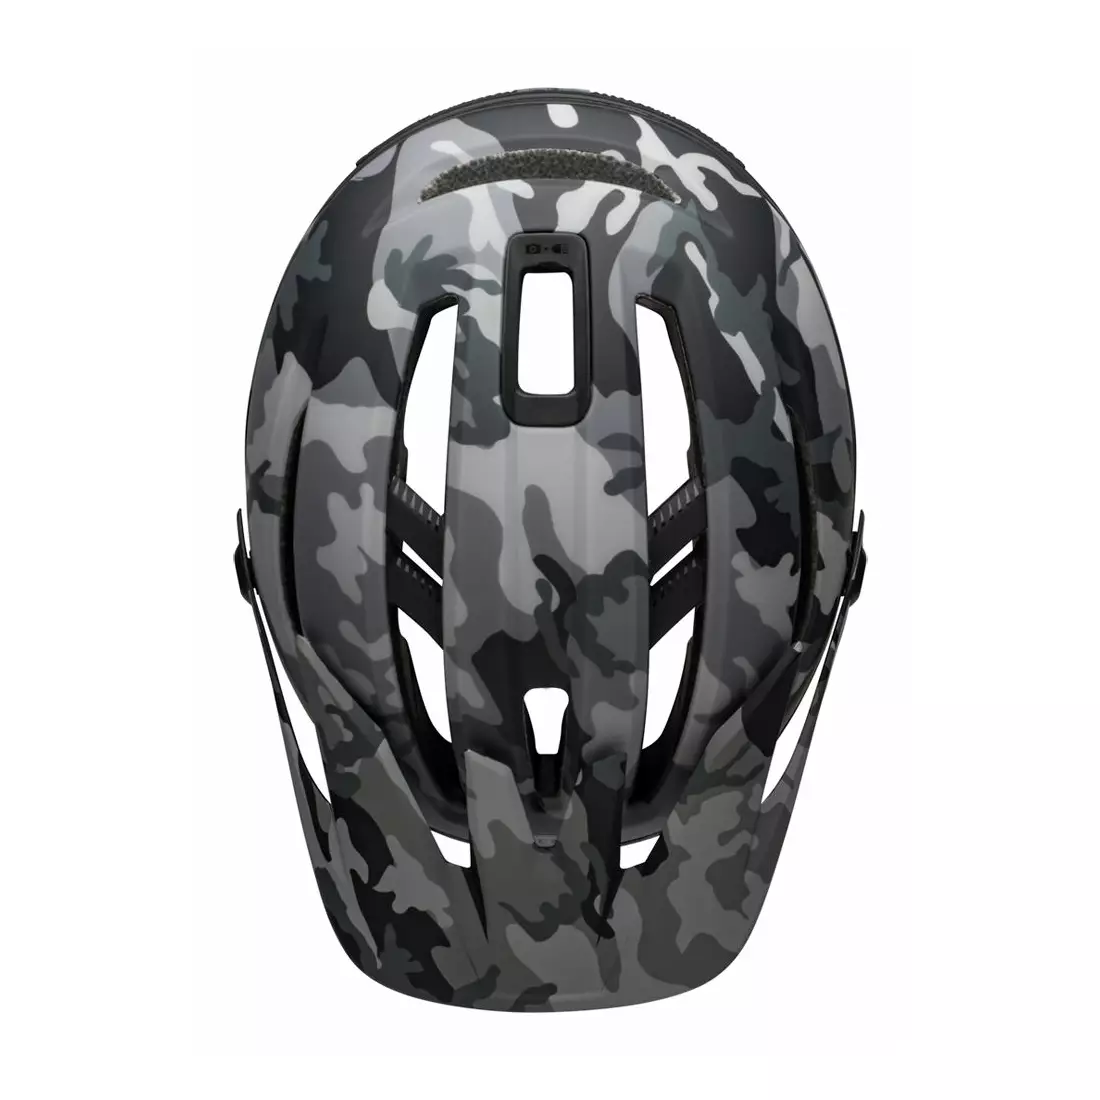 BELL kask rowerowy mtb SIXER INTEGRATED MIPS, matte gloss black camo 